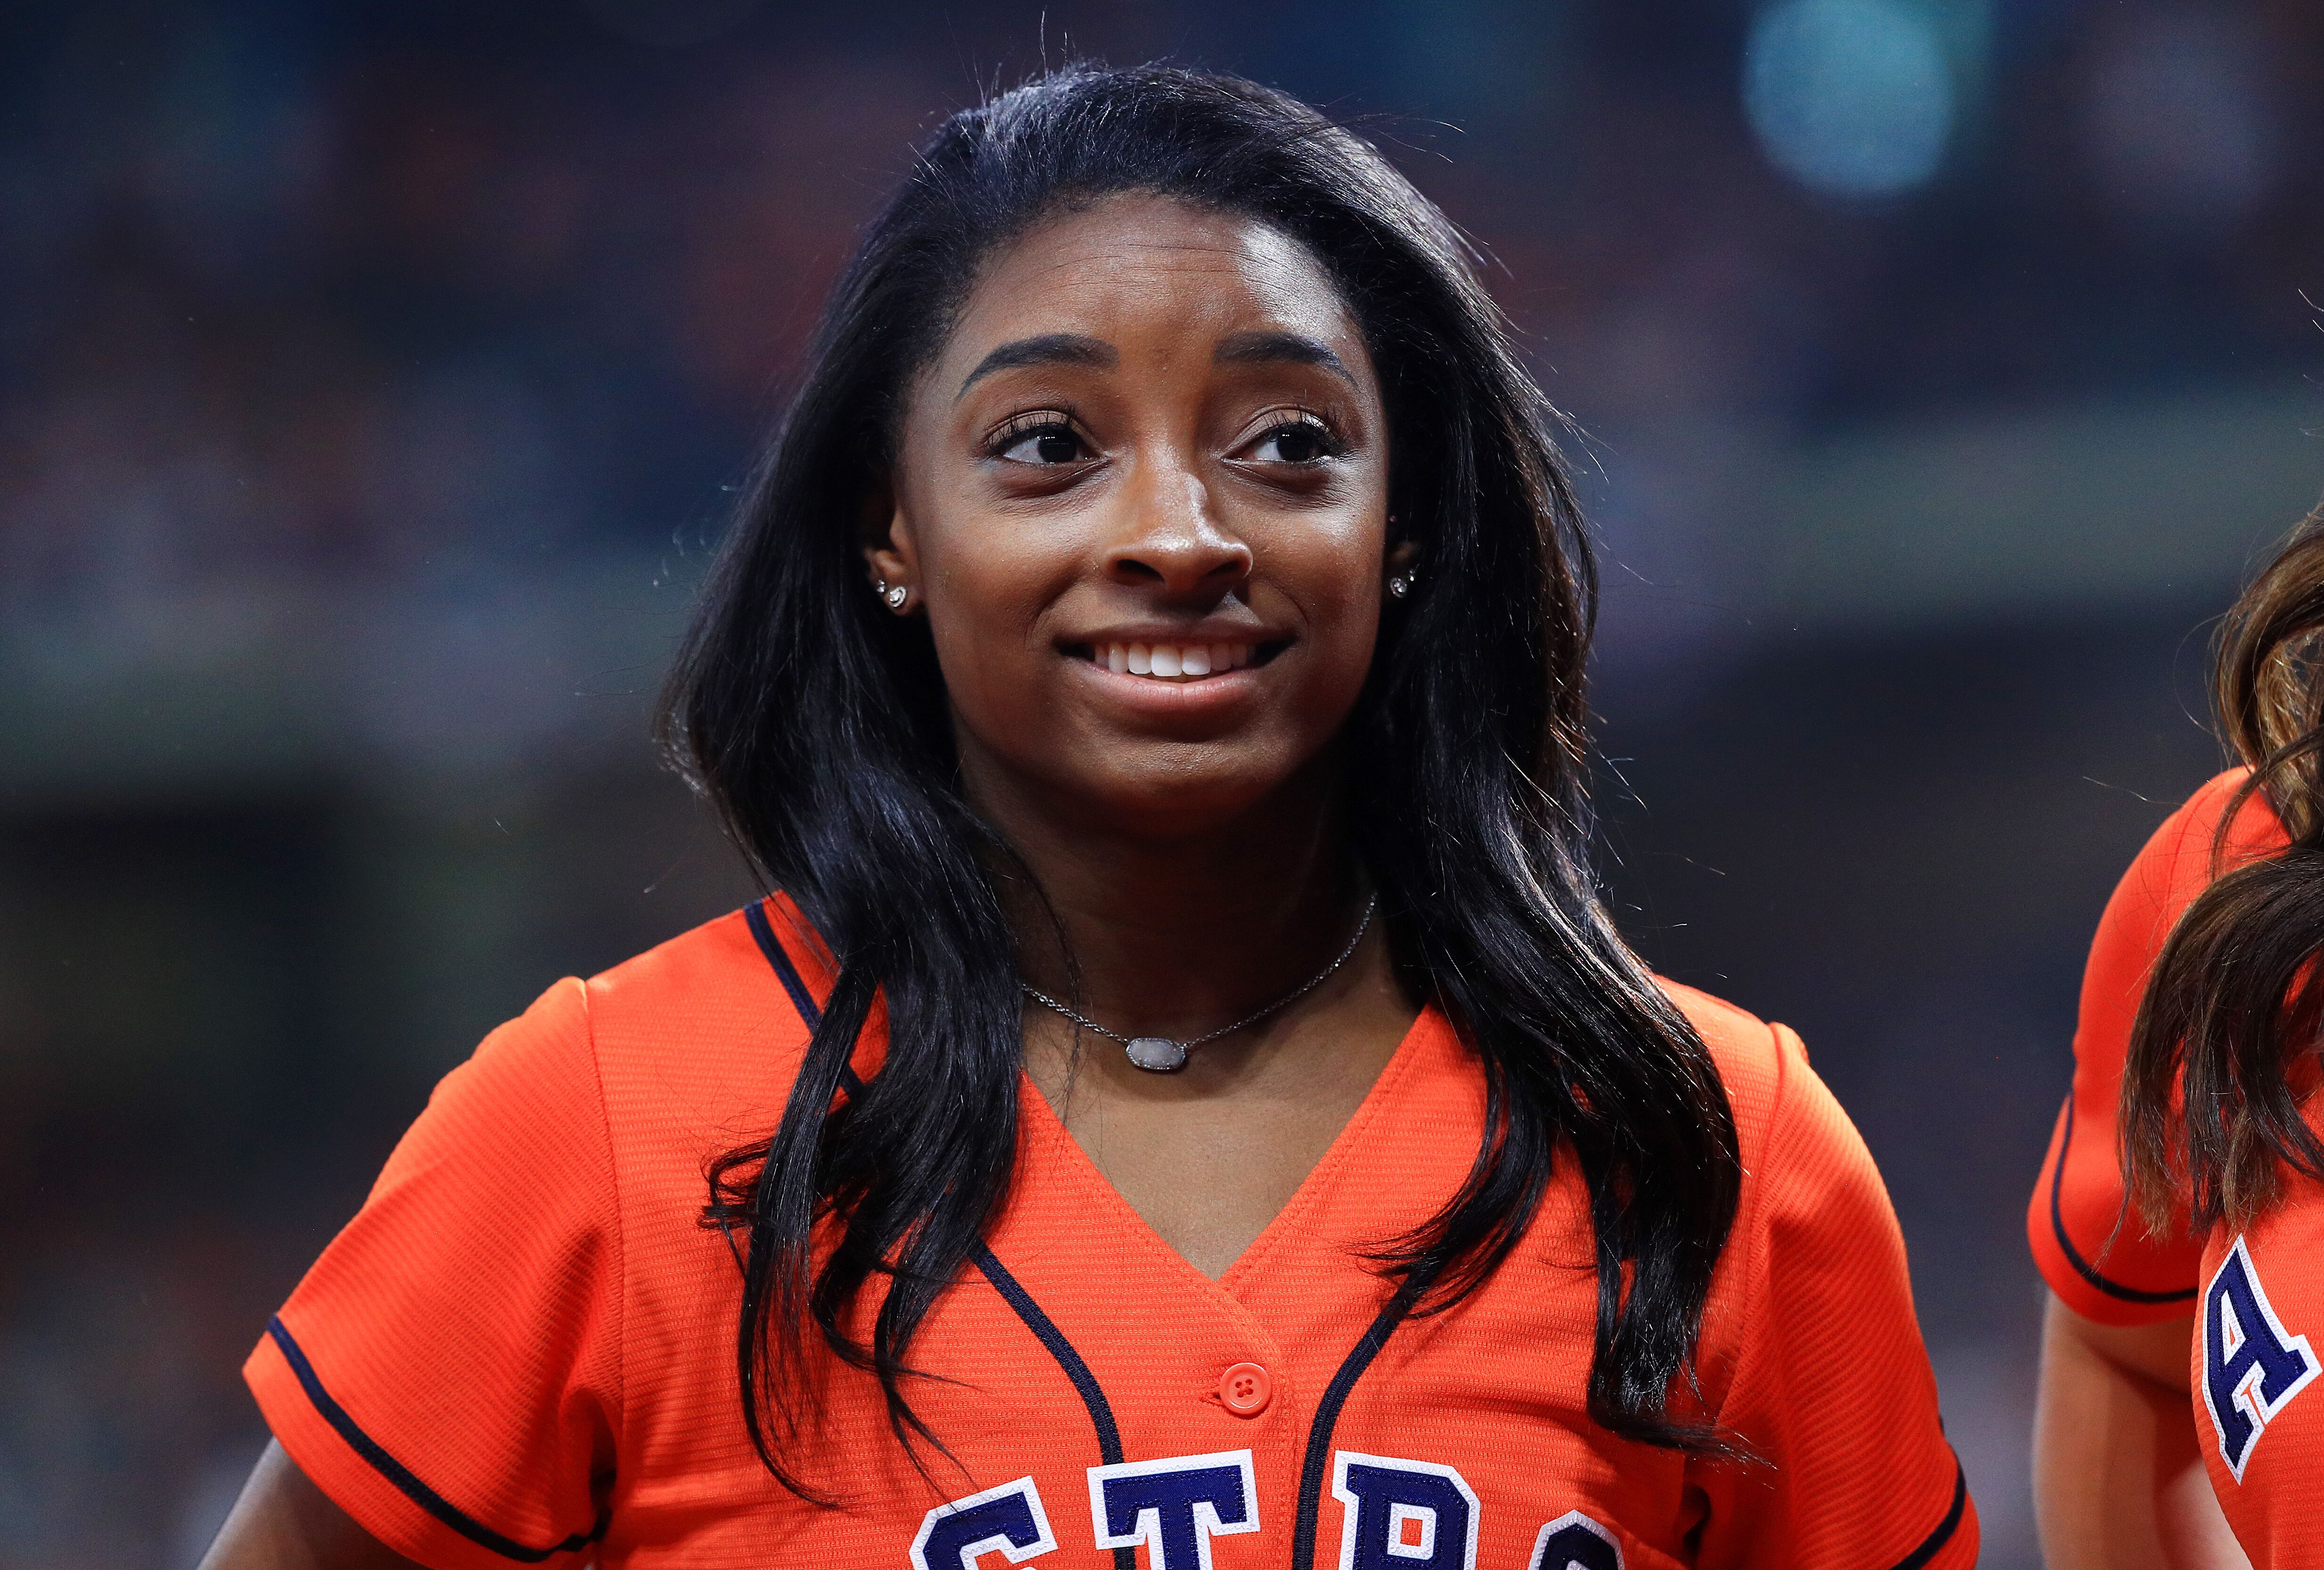 Simone Biles at Game 2 of the 2019 World Series between the Houston Astros and the Washington Nationals on October 23, 2019 | Photo: Getty Images